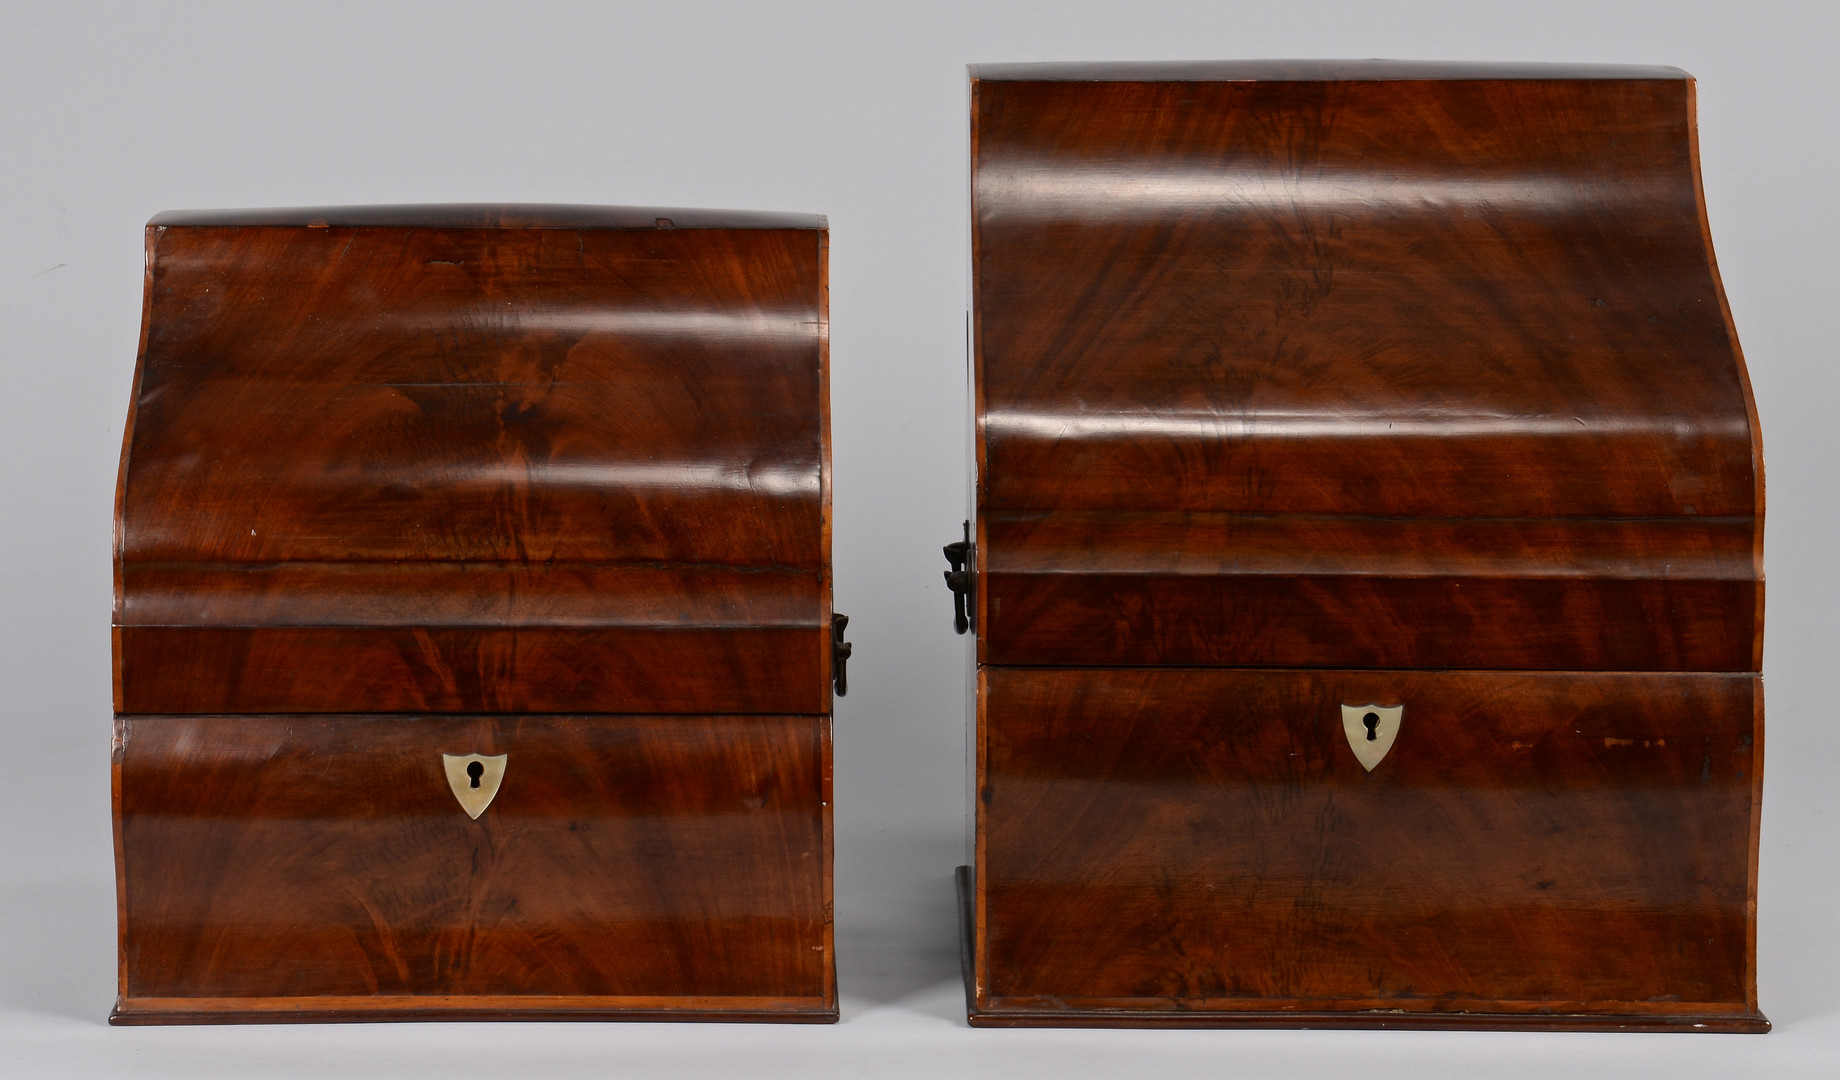 Lot 157: Two Knife Boxes, c.1830